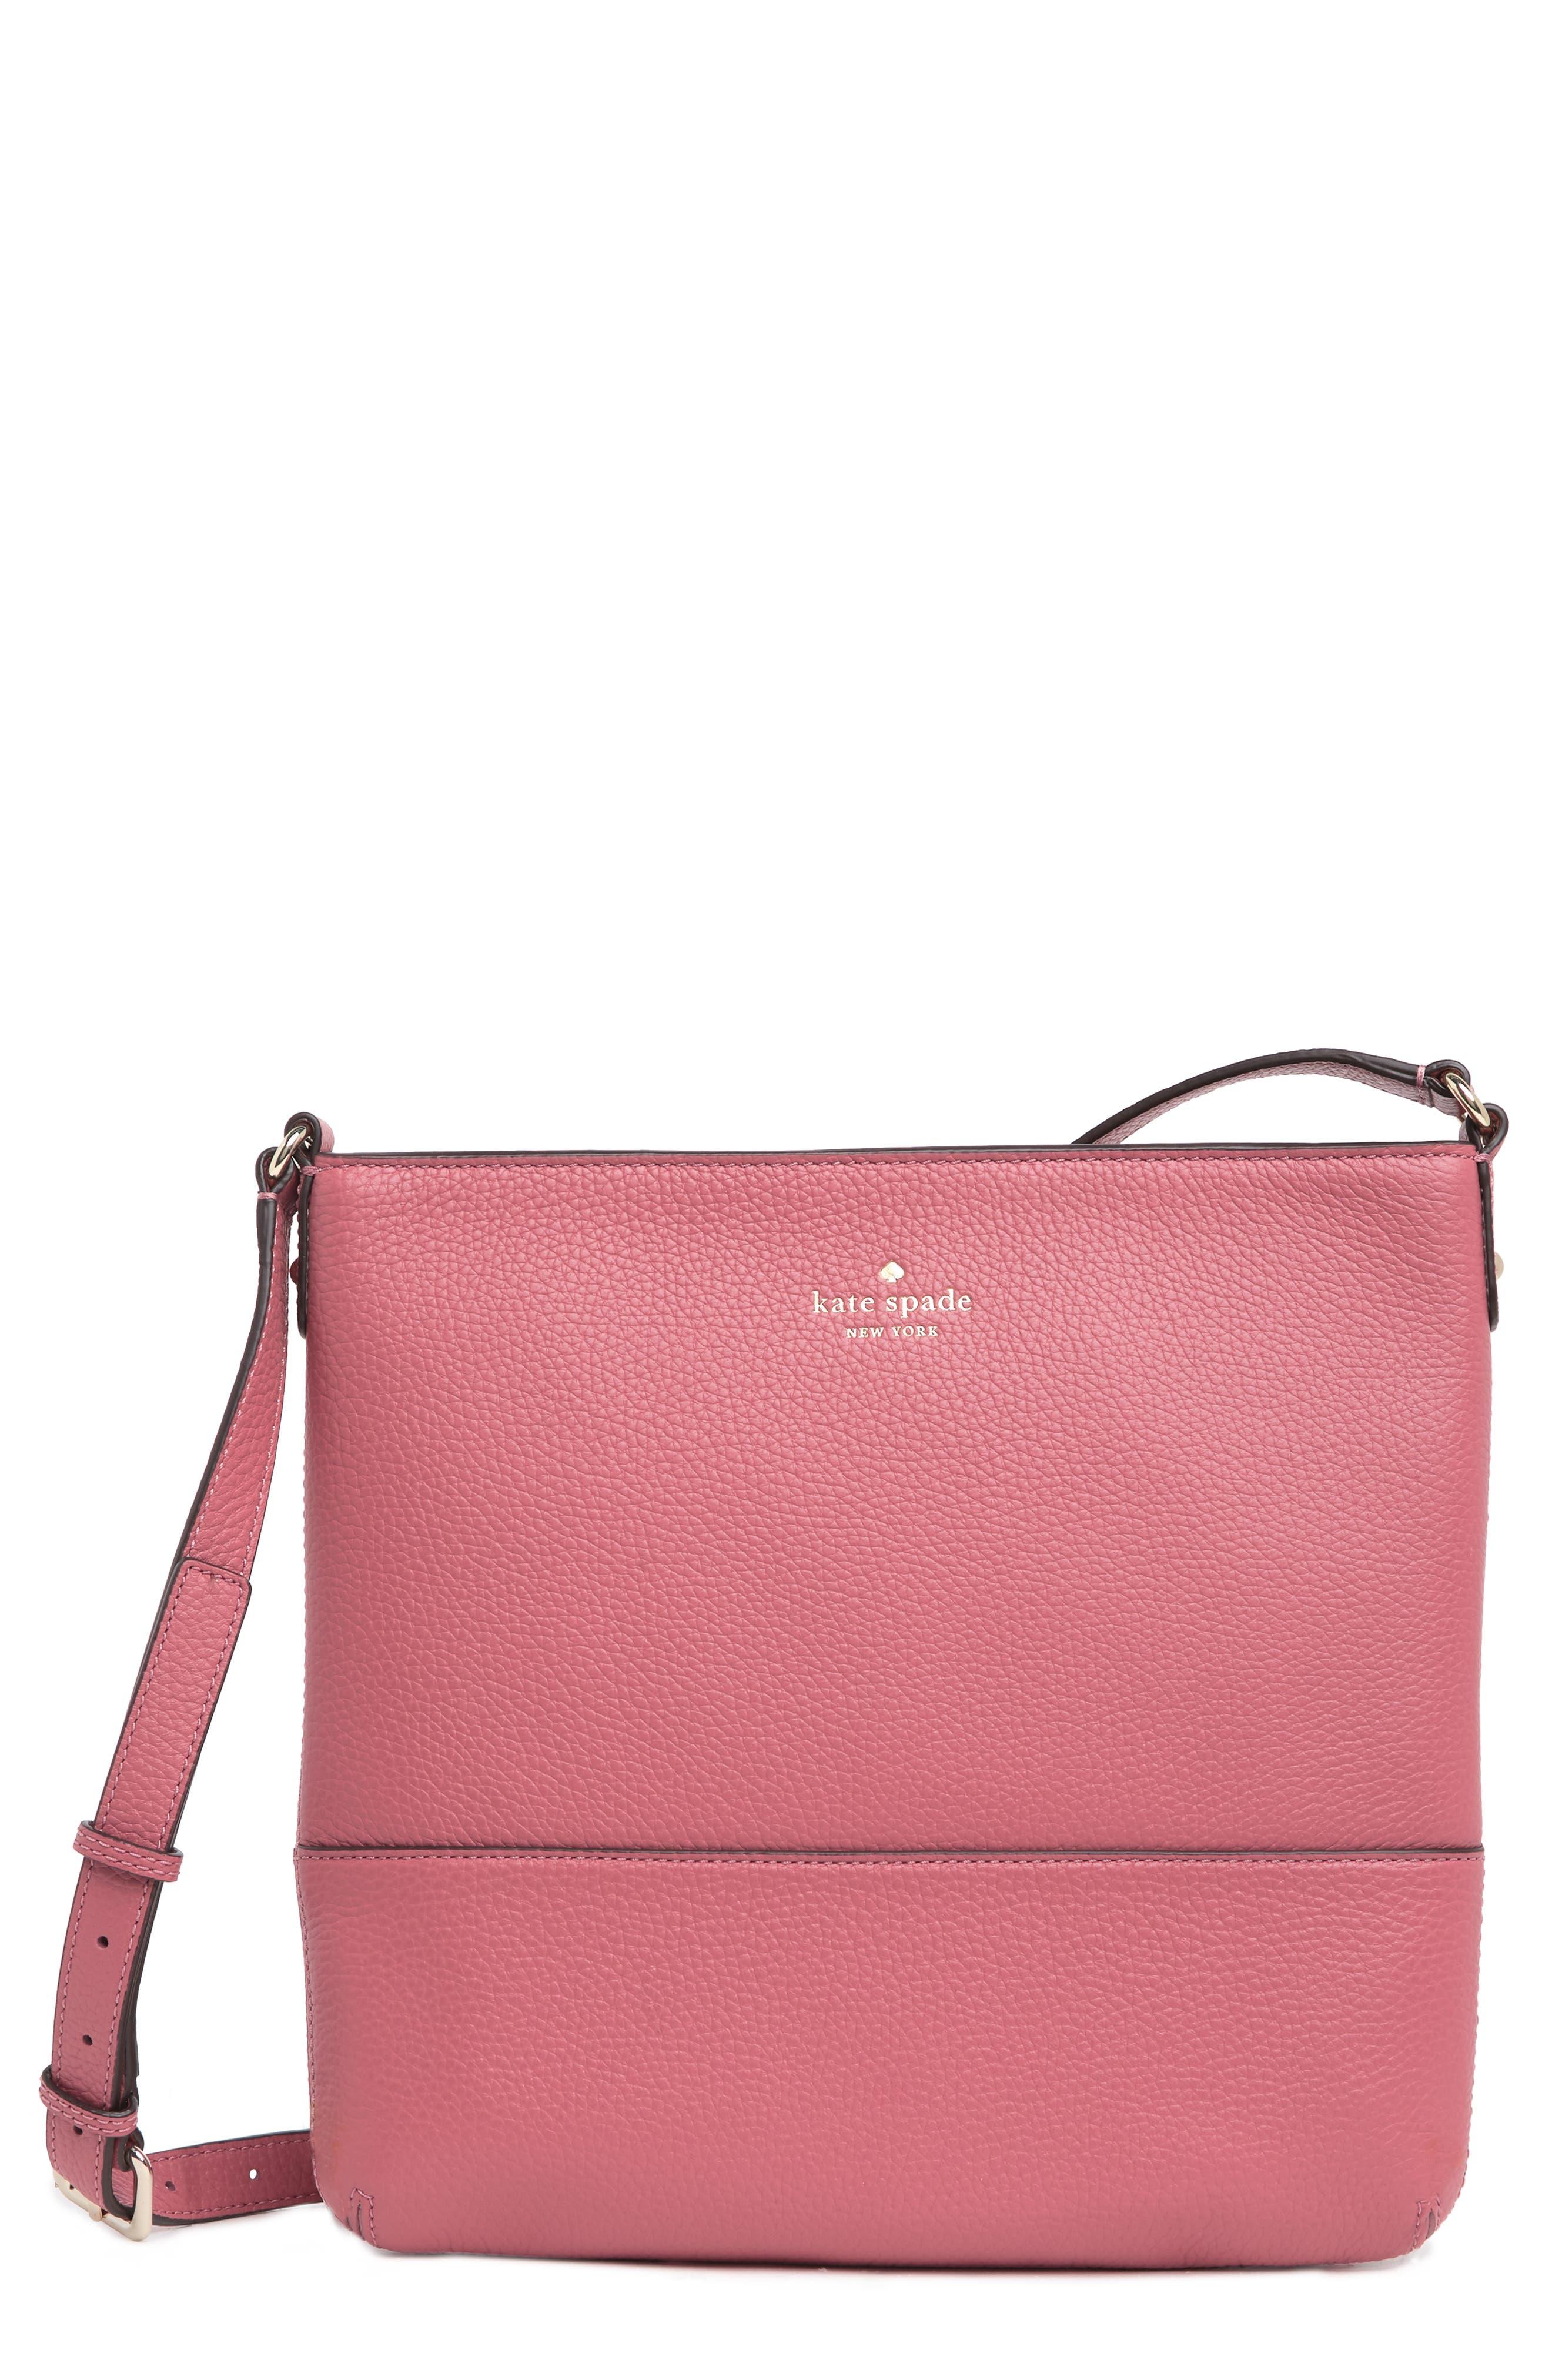 Kate Spade Southport Avenue Cora Crossbody Bag in Pink | Lyst